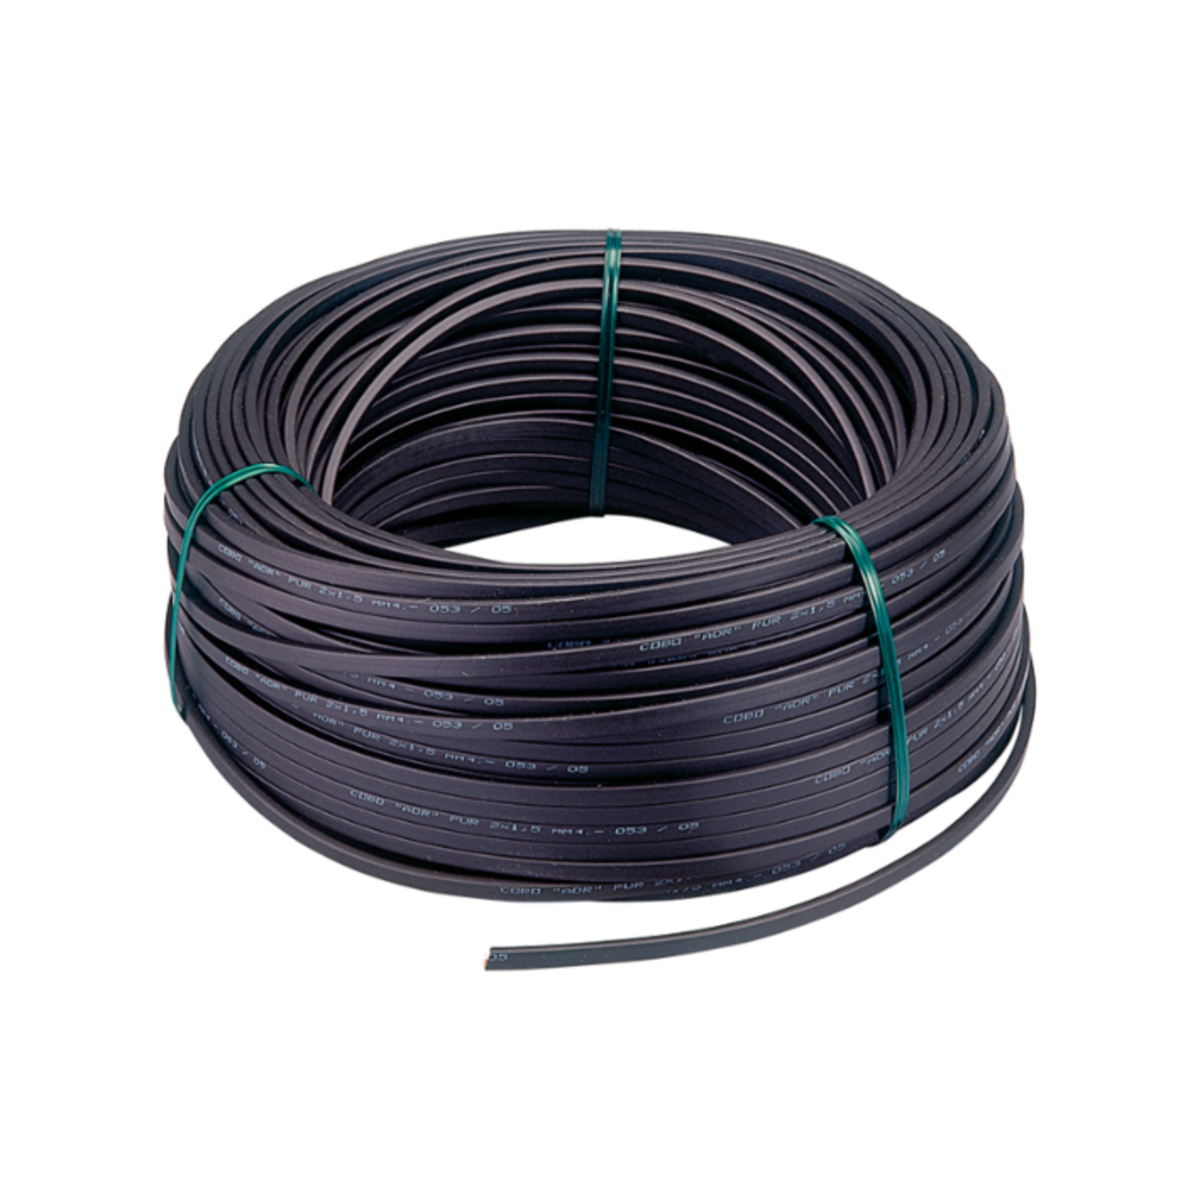 ADR COMPLIANT CABLE 5X1 W-BR-GR-Y-G